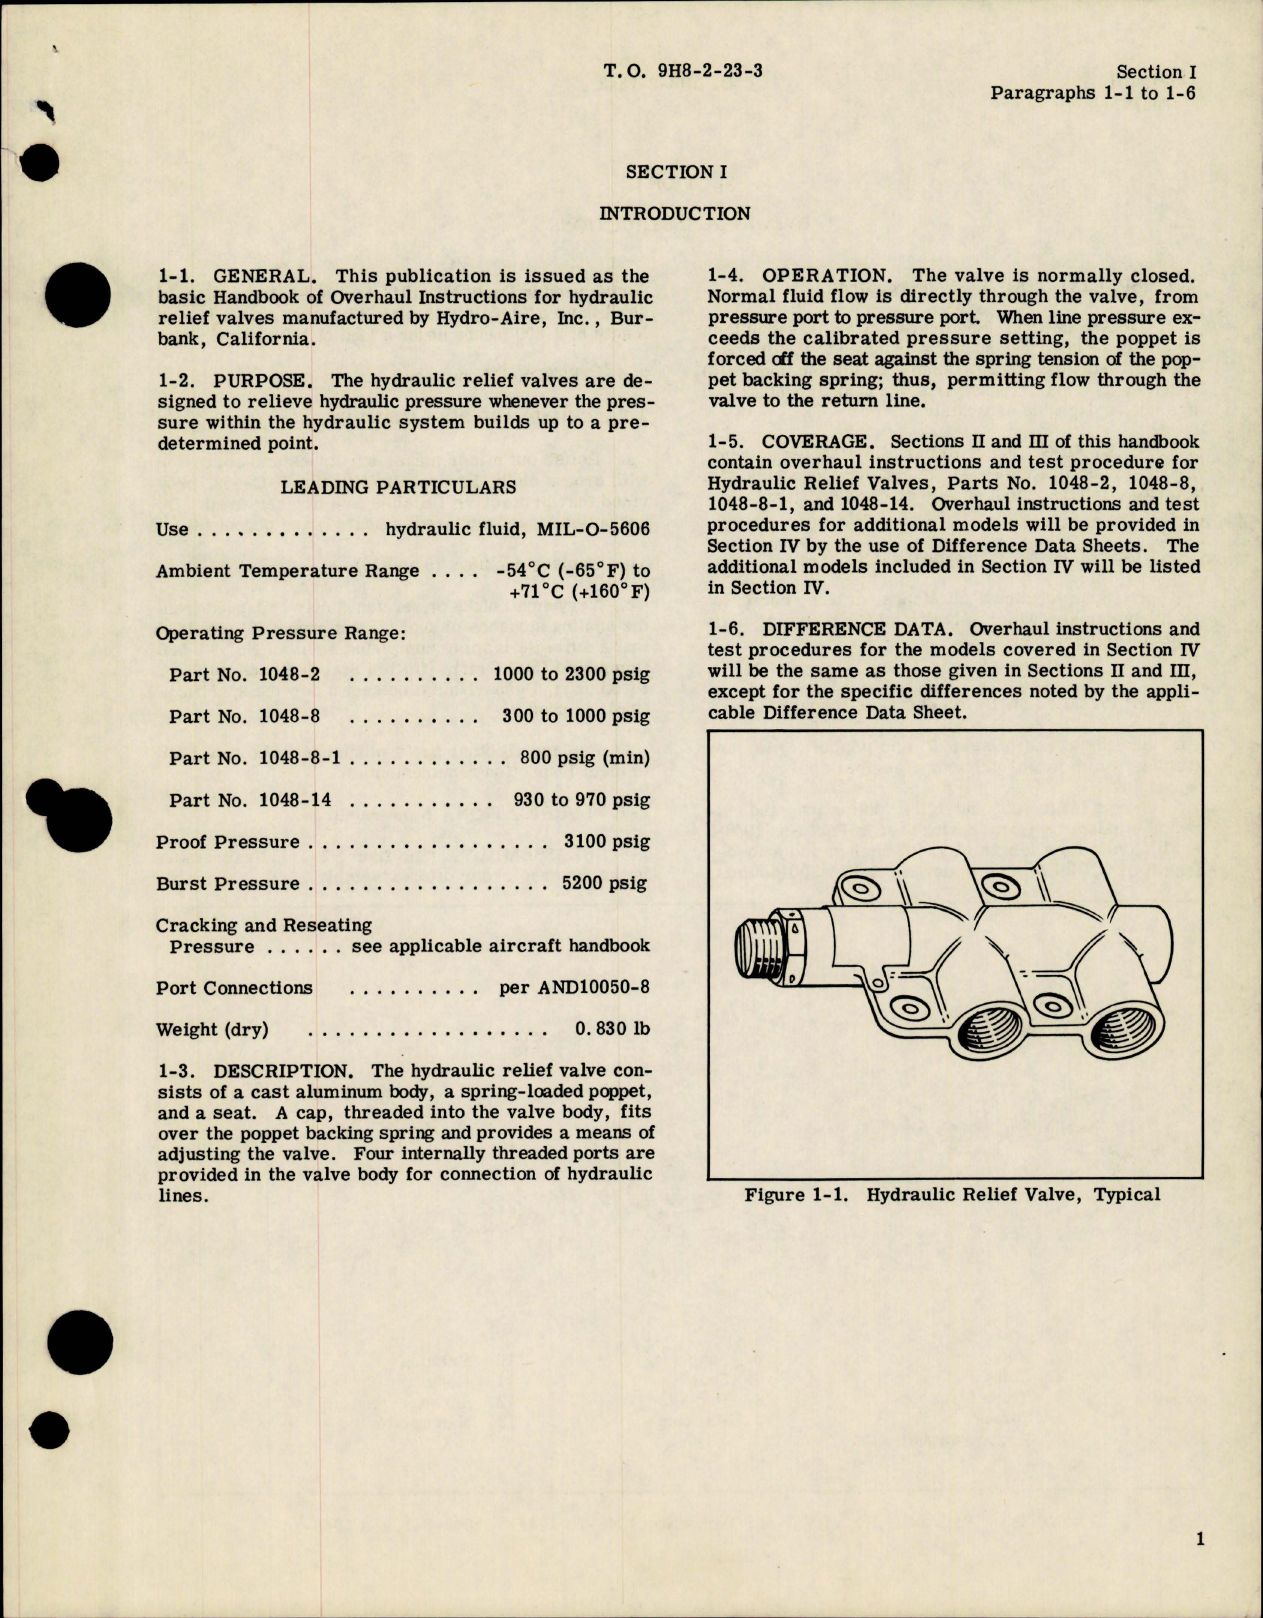 Sample page 5 from AirCorps Library document: Overhaul Instructions for Hydraulic Relief Valve - Parts 1048-2, 1048-8, 1048-8-1 and 1048-14 